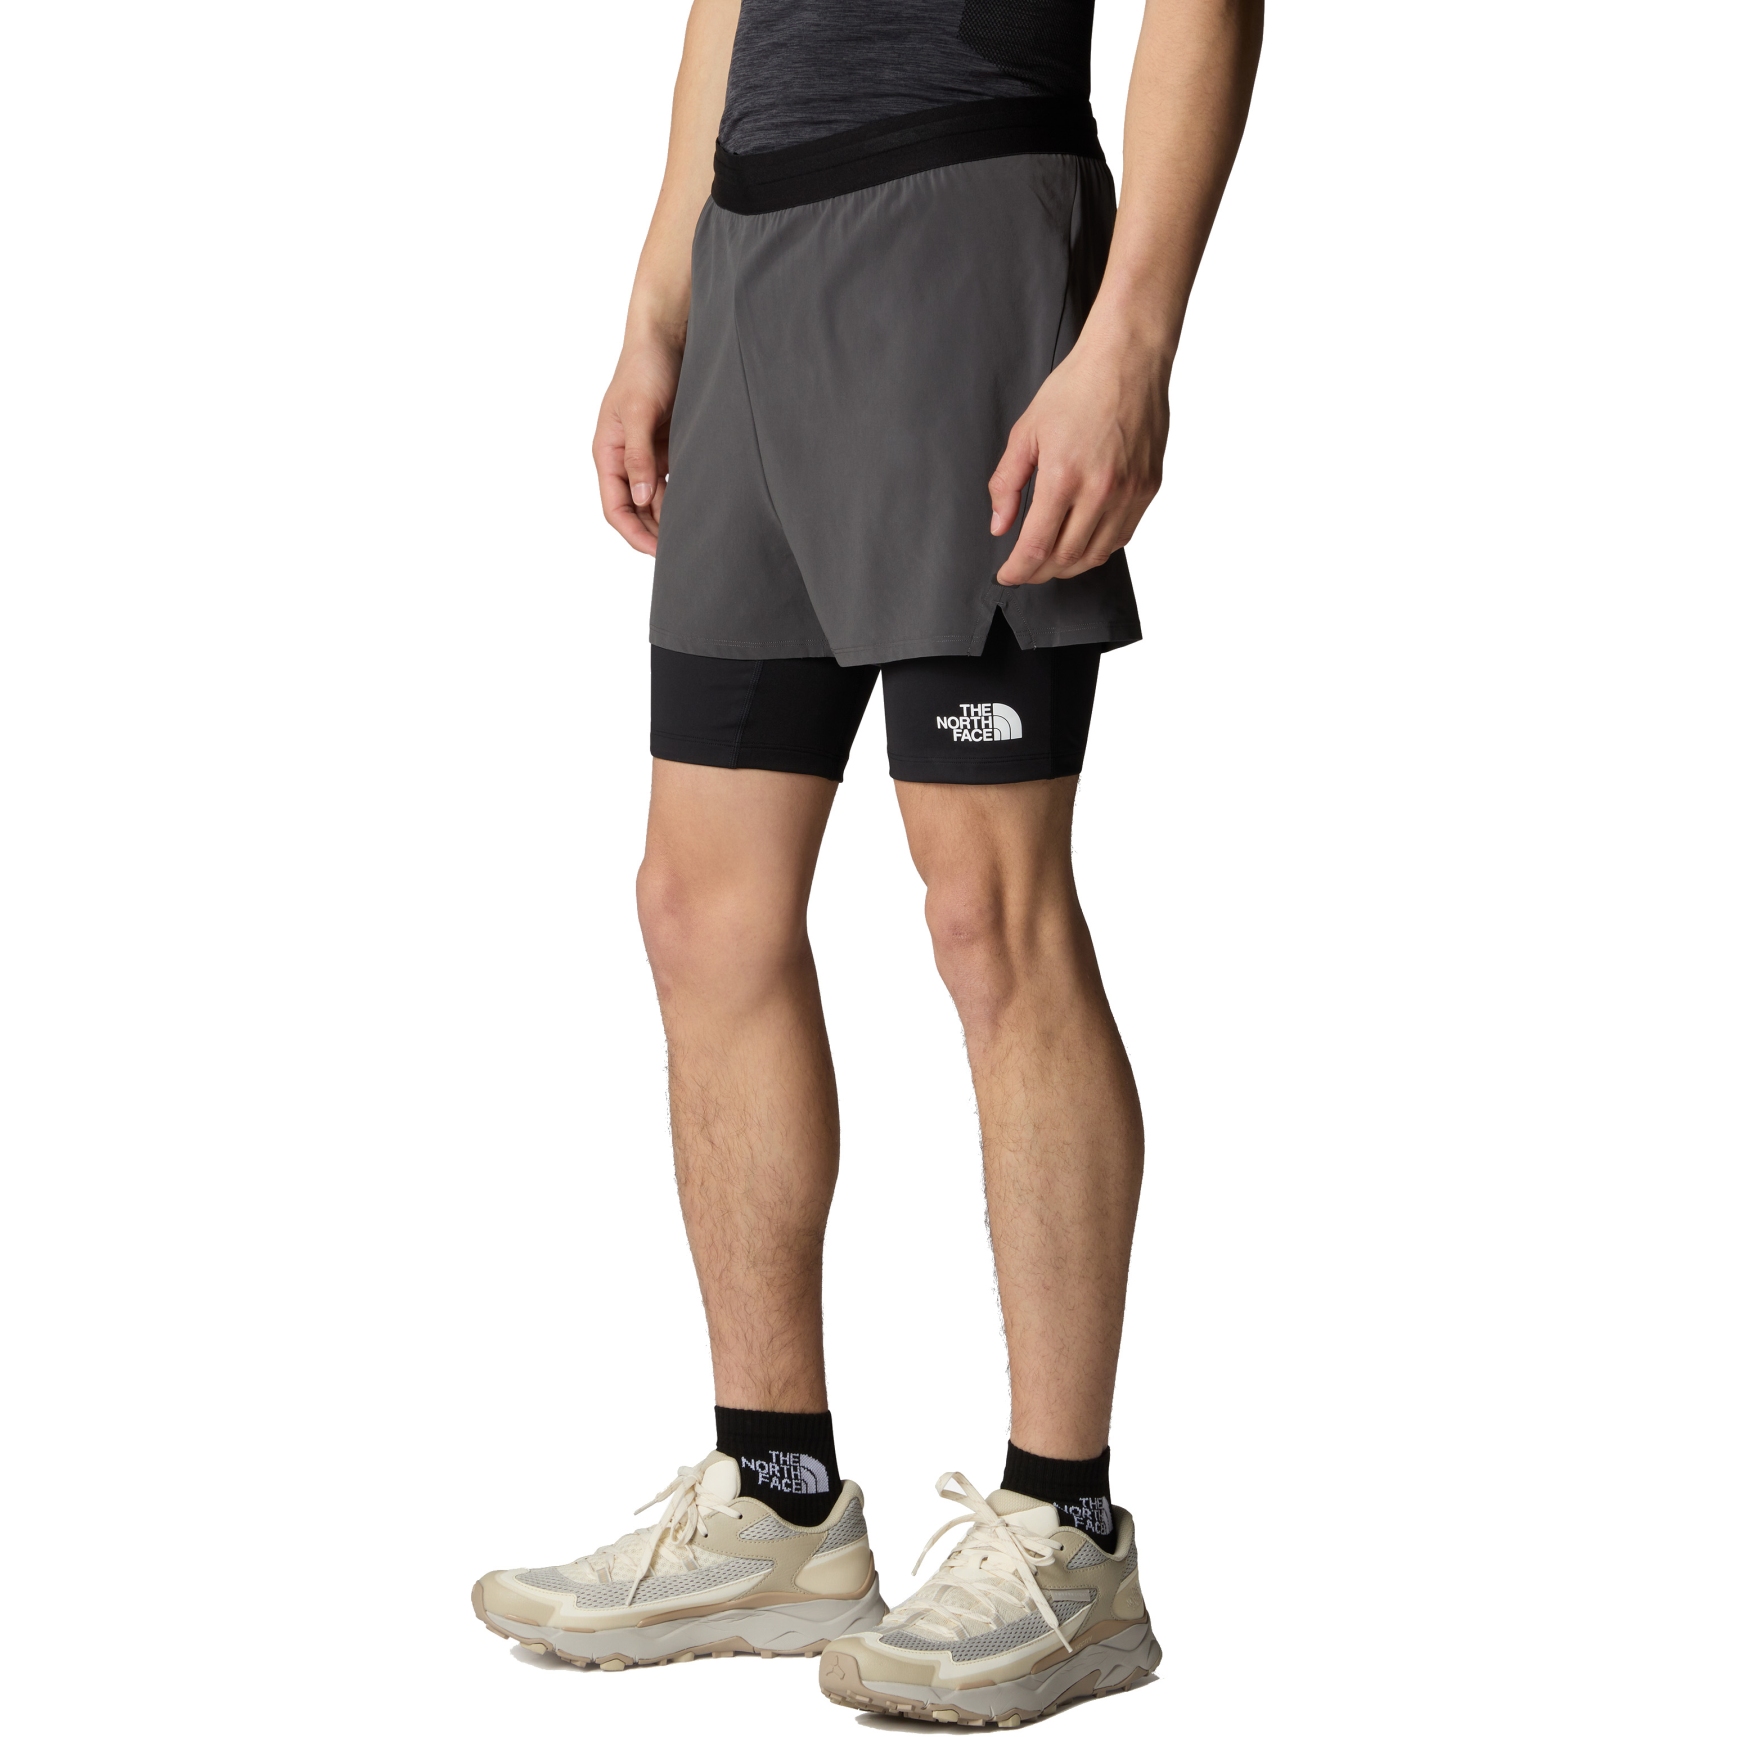 Picture of The North Face Mountain Athletics Lab Dual Shorts Men - Anthracite Grey/TNF Black